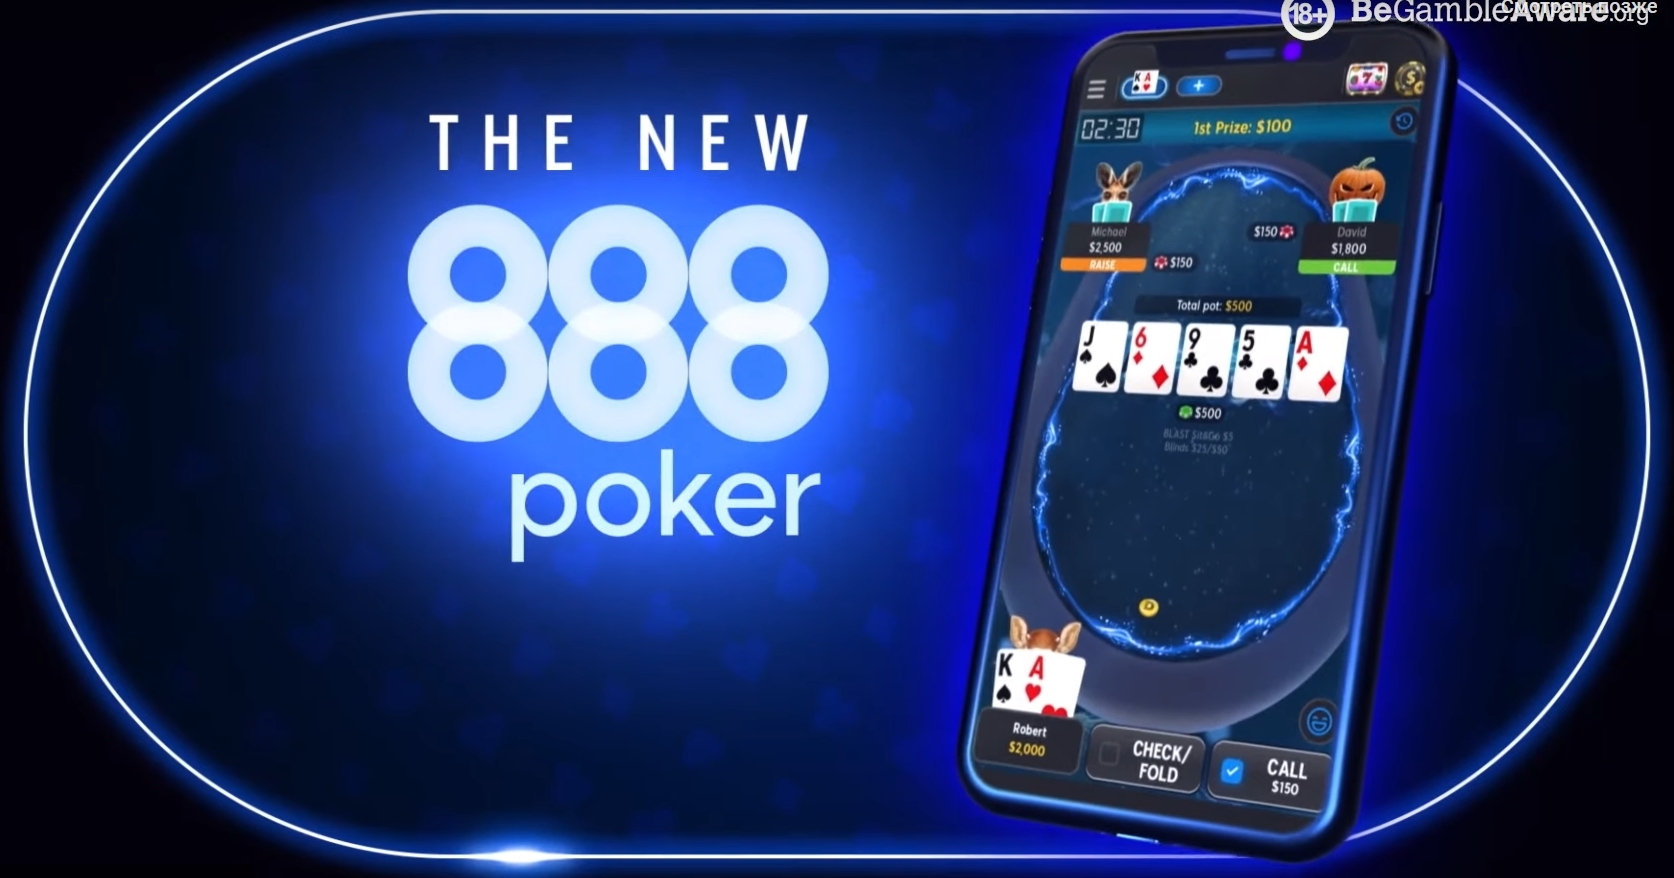 888Poker has updated its mobile client